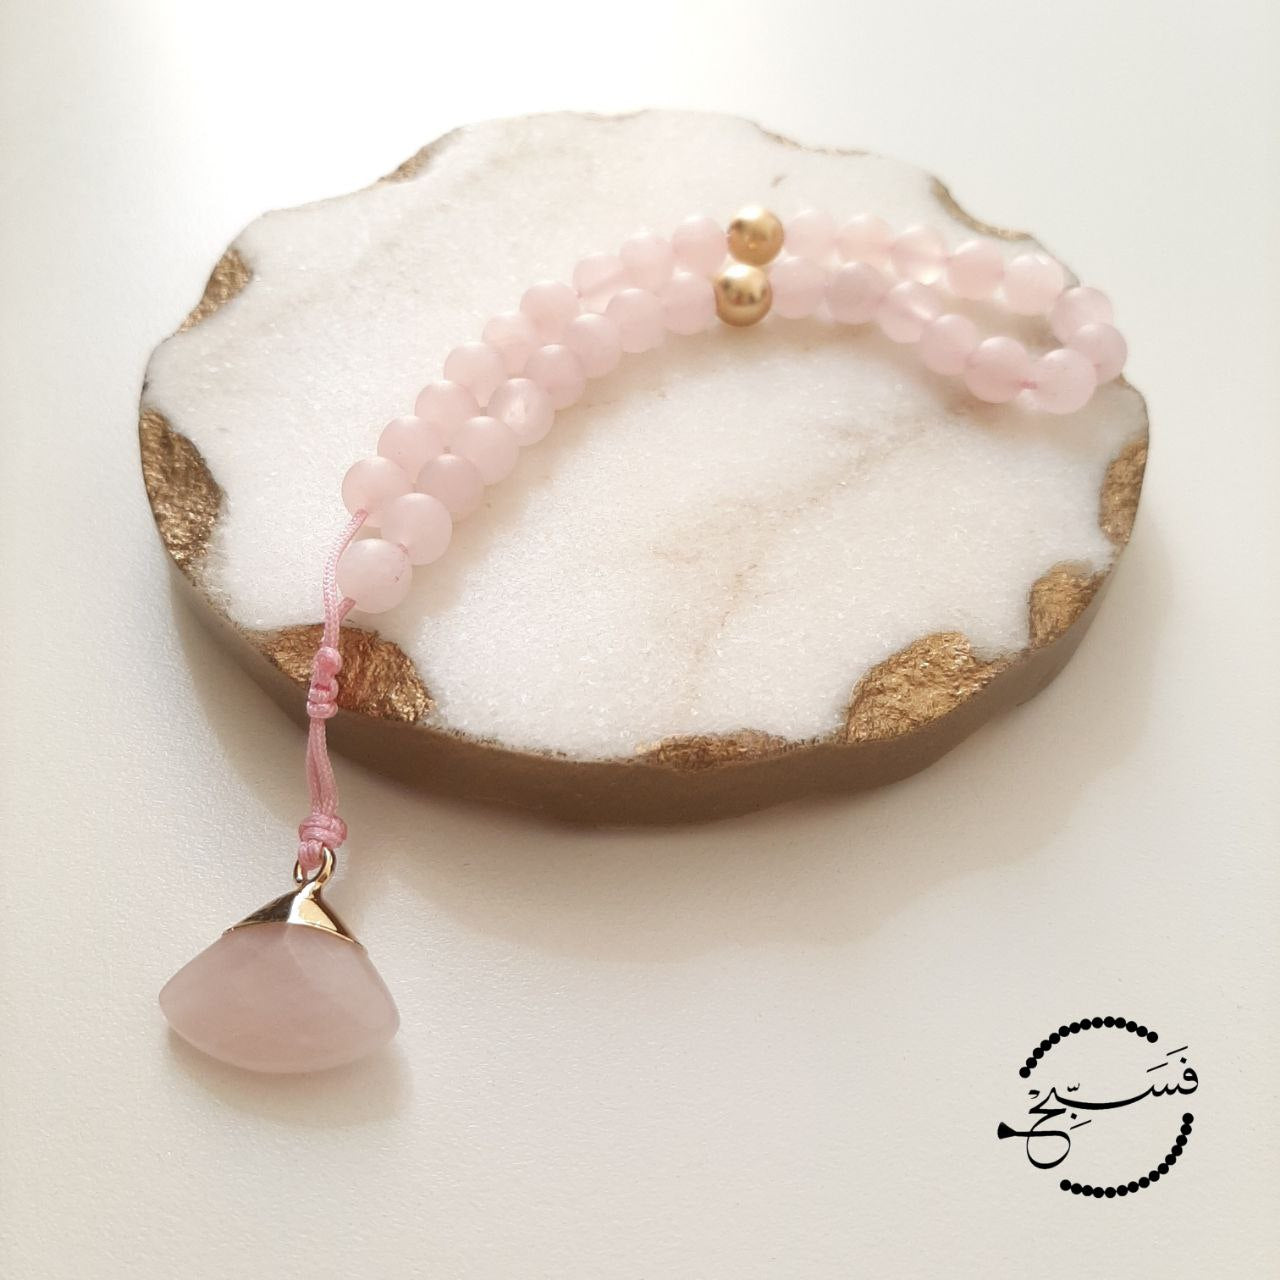 Rose quartz and matte gold beads, with a rose quartz pendant.  Features an adjustable knot.  33 beads (6mm beads)